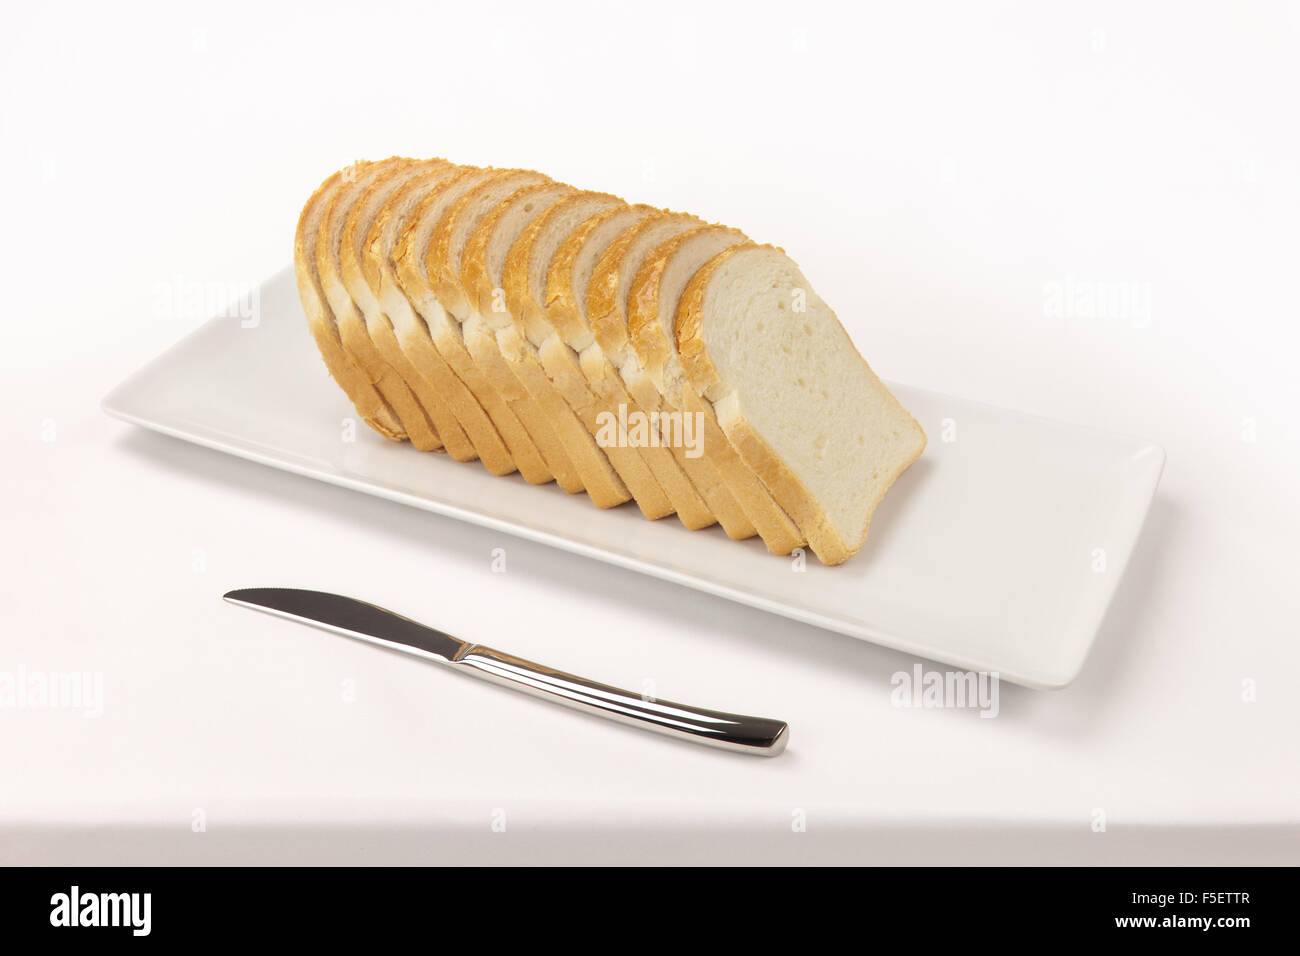 A sliced bread on a rectangular dish and a knife on a white tablecloth. Stock Photo